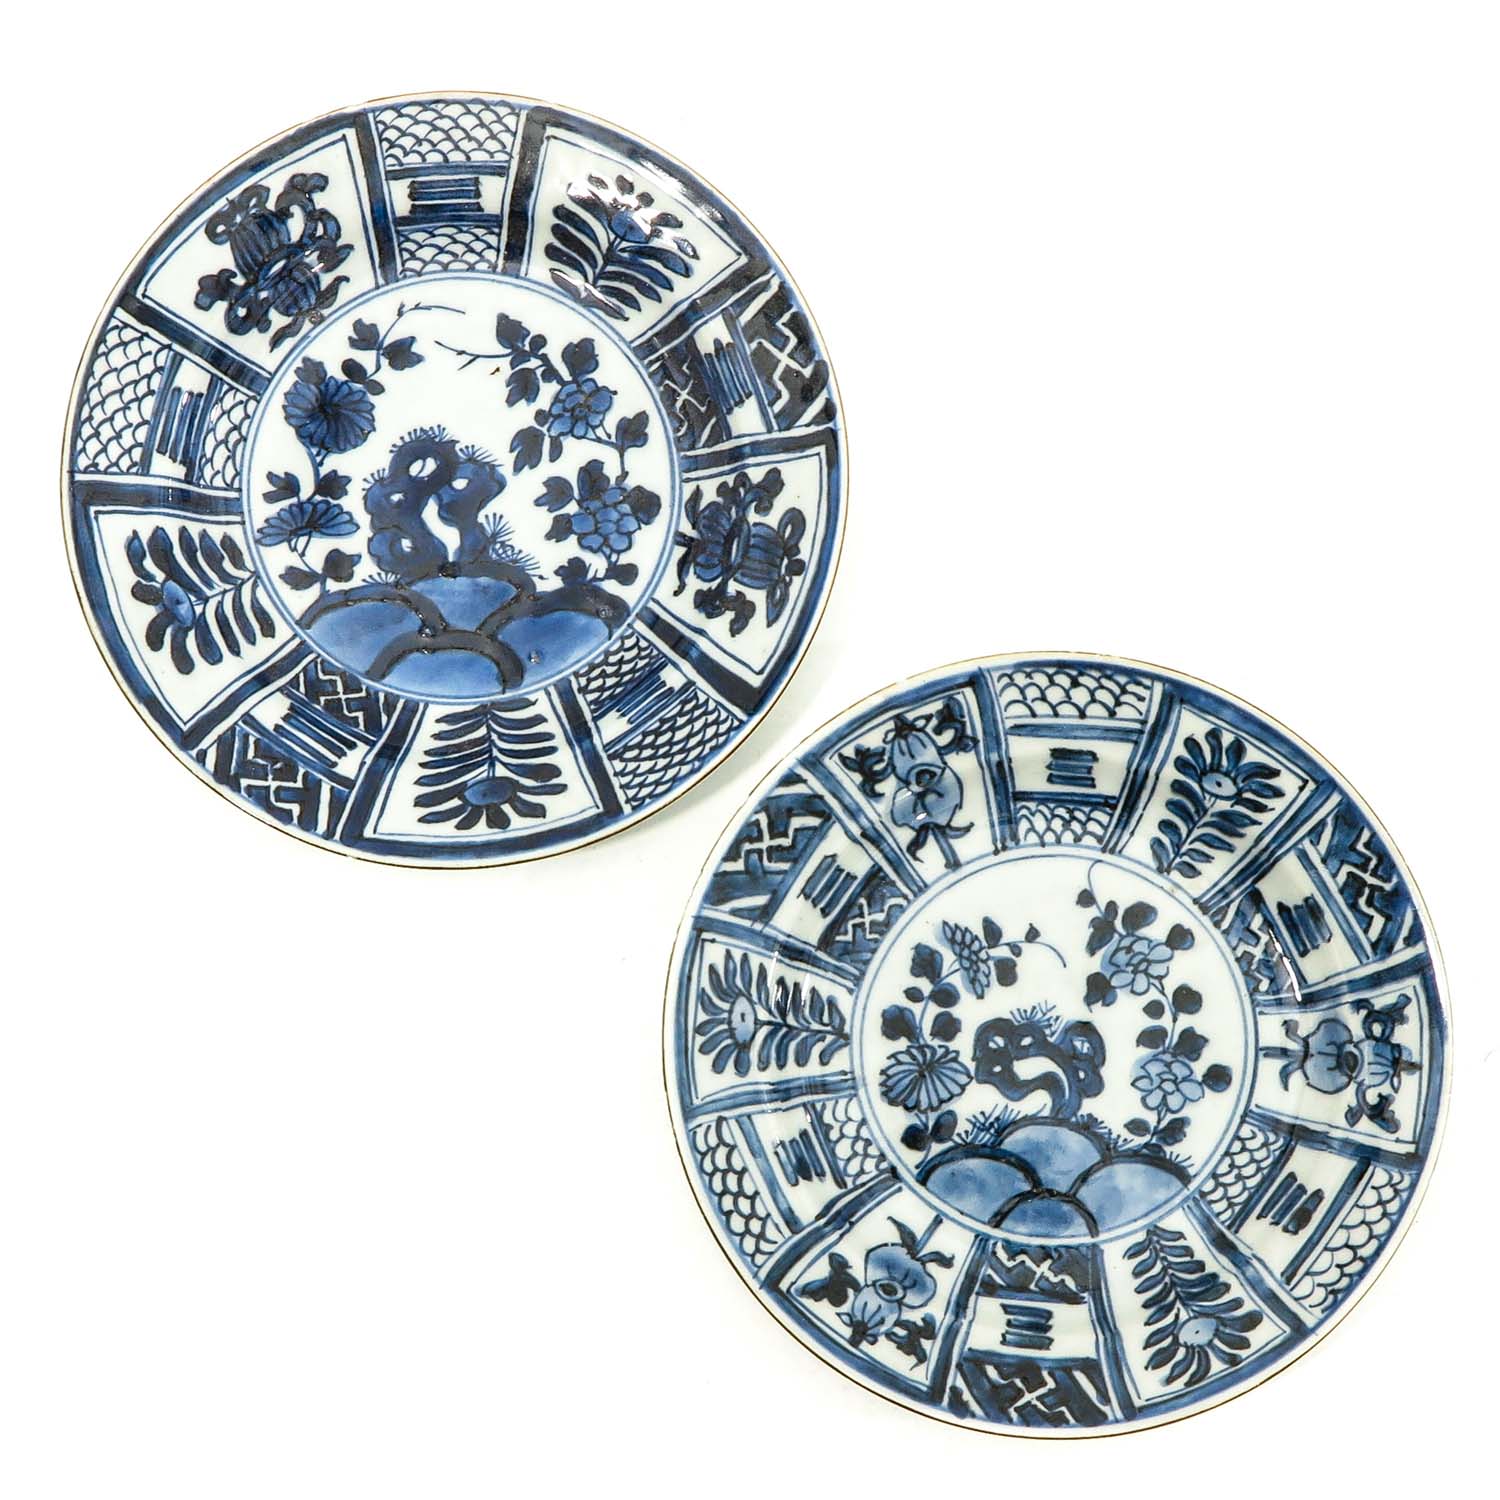 A Collection of 6 Blue and White Plates - Image 3 of 10